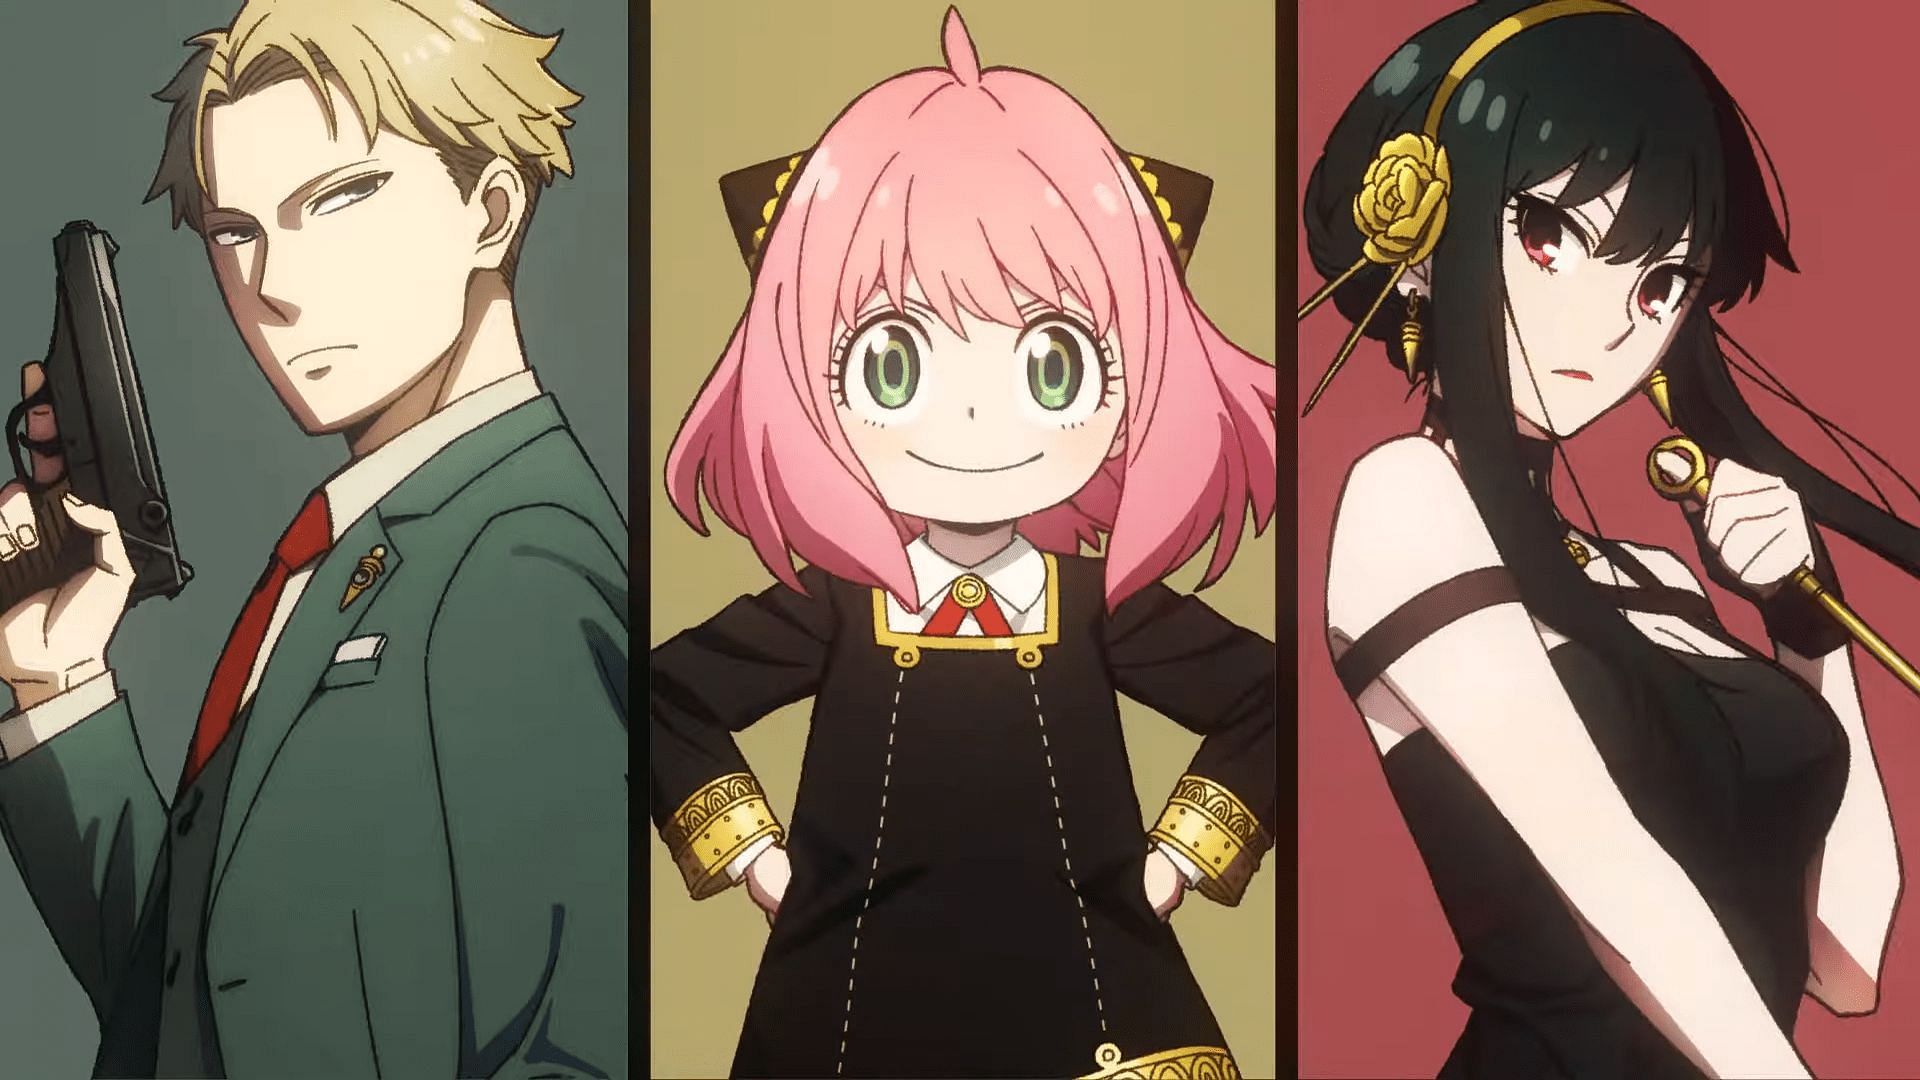 From left to right, protagonists Loid, Anya, and Yor Forger (Image via Wit Studios/Cloverworks)